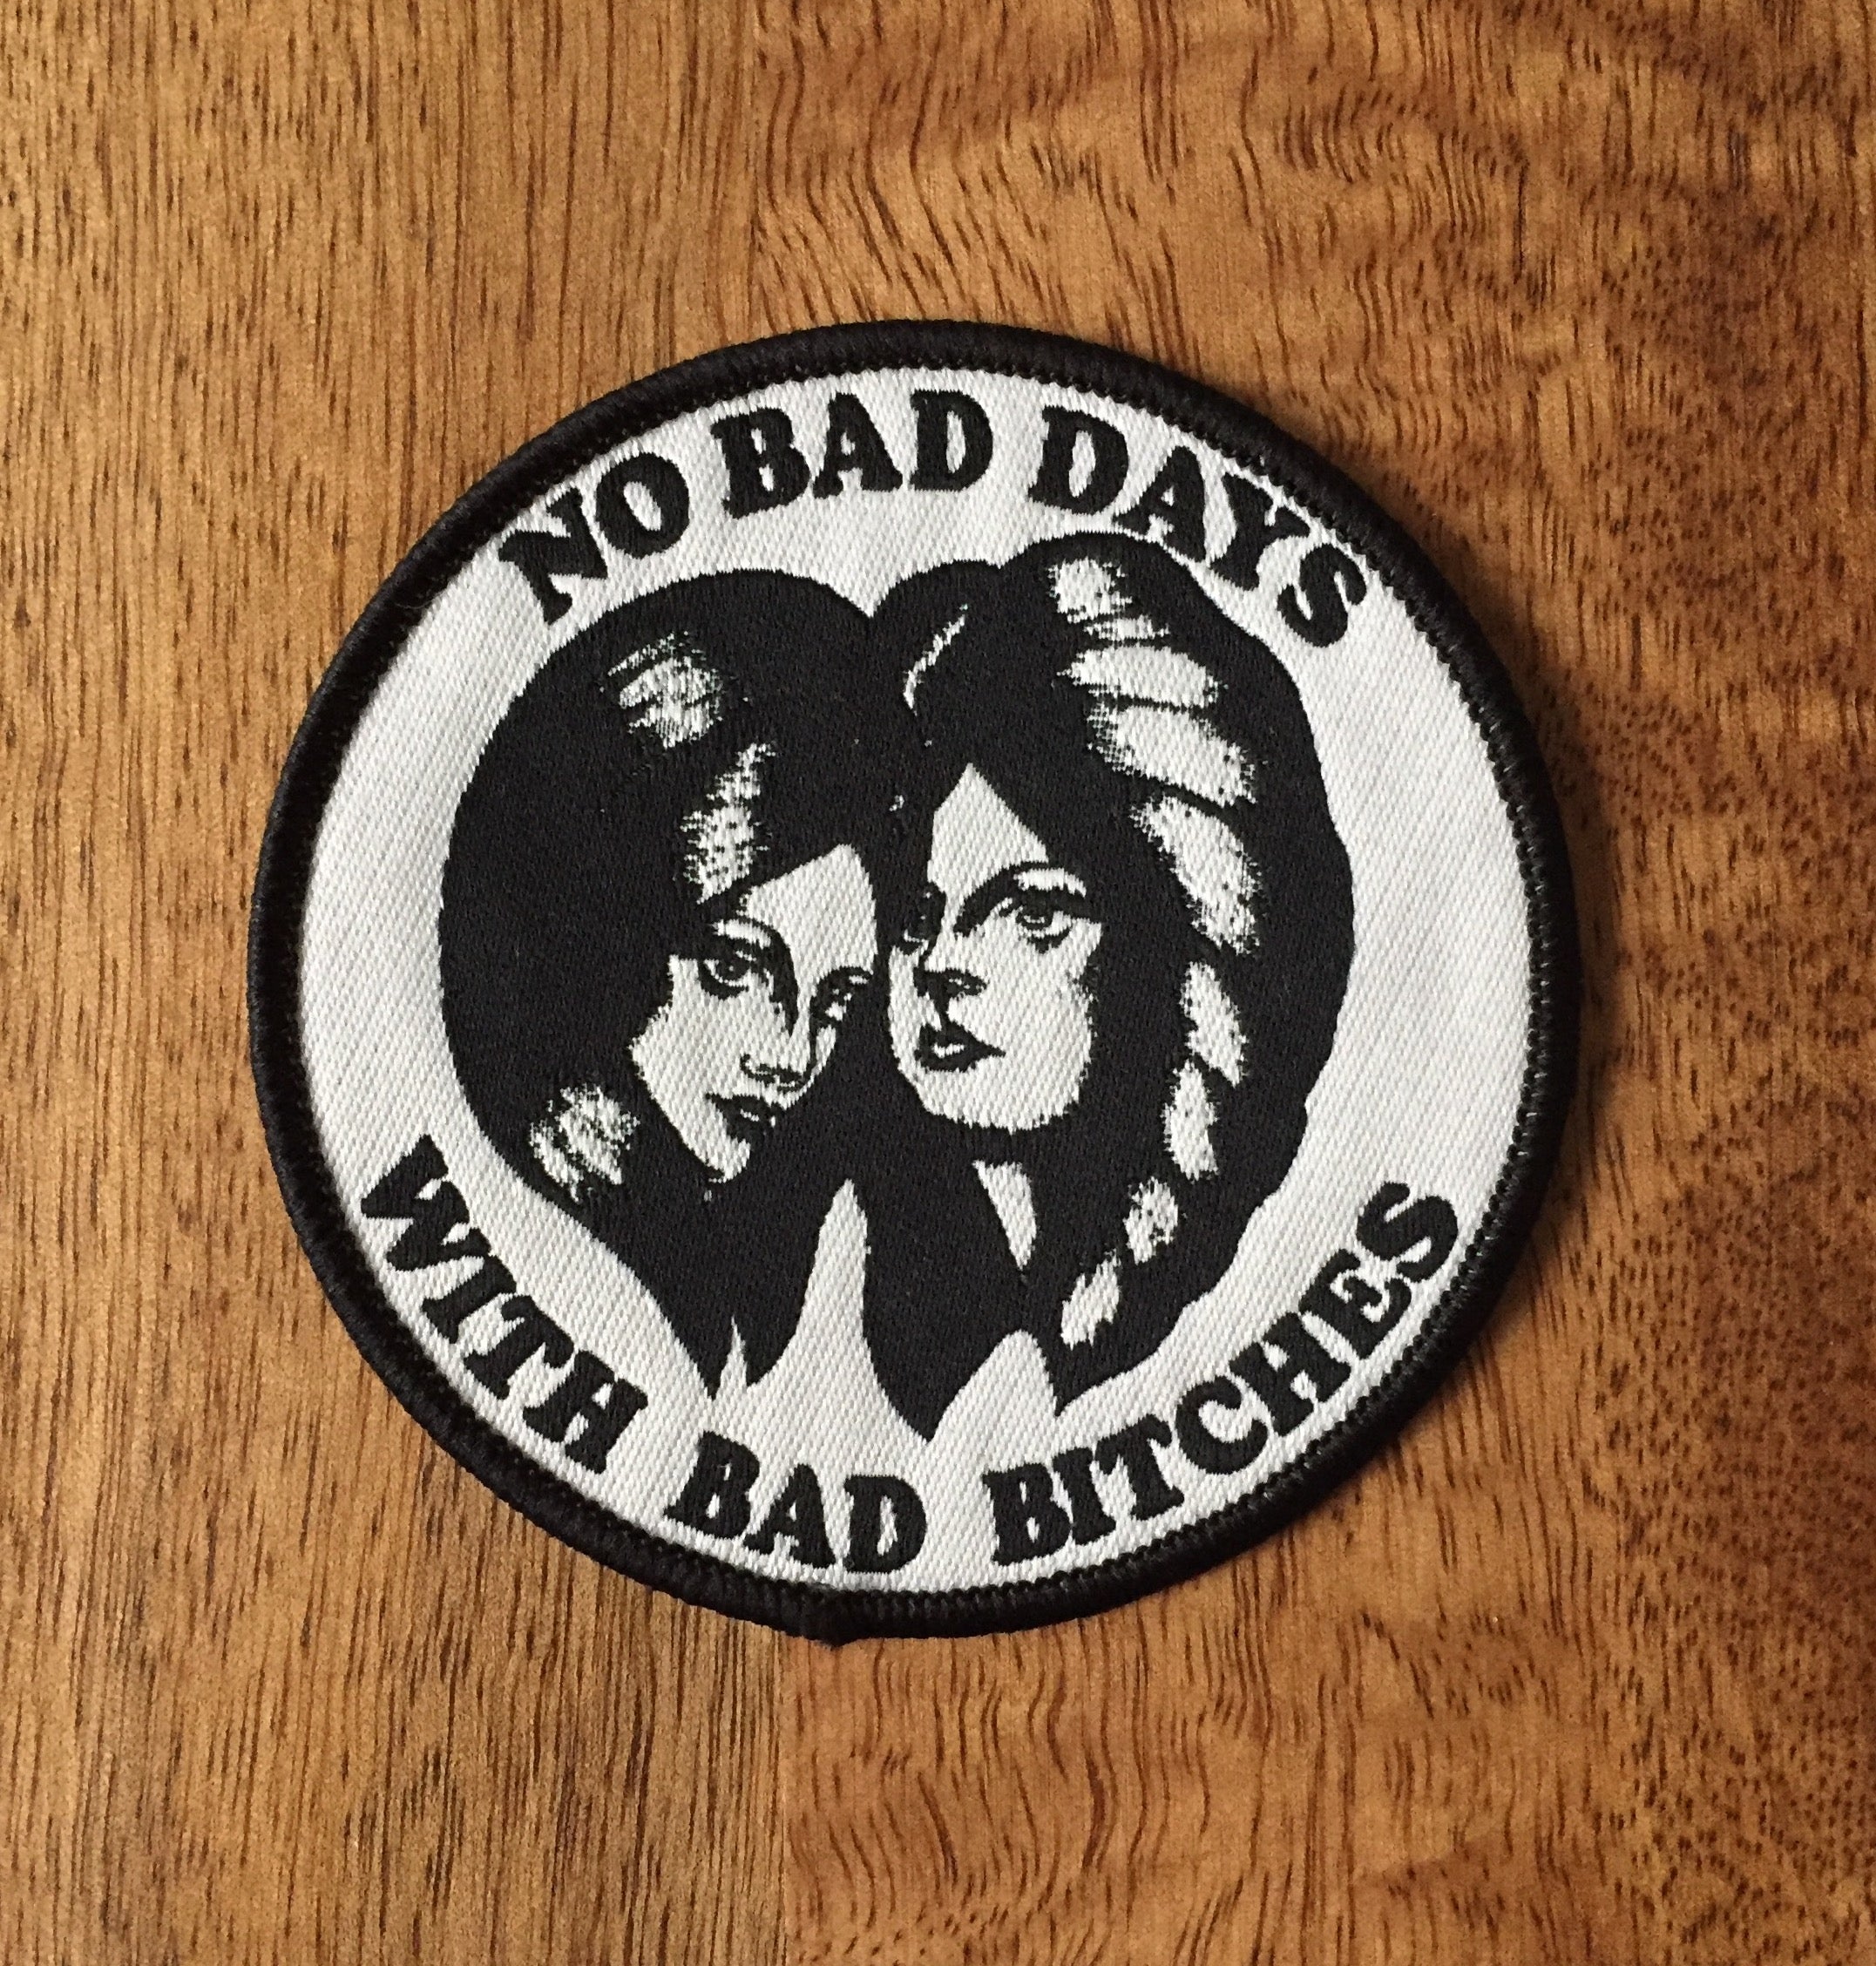 Bad Patch
